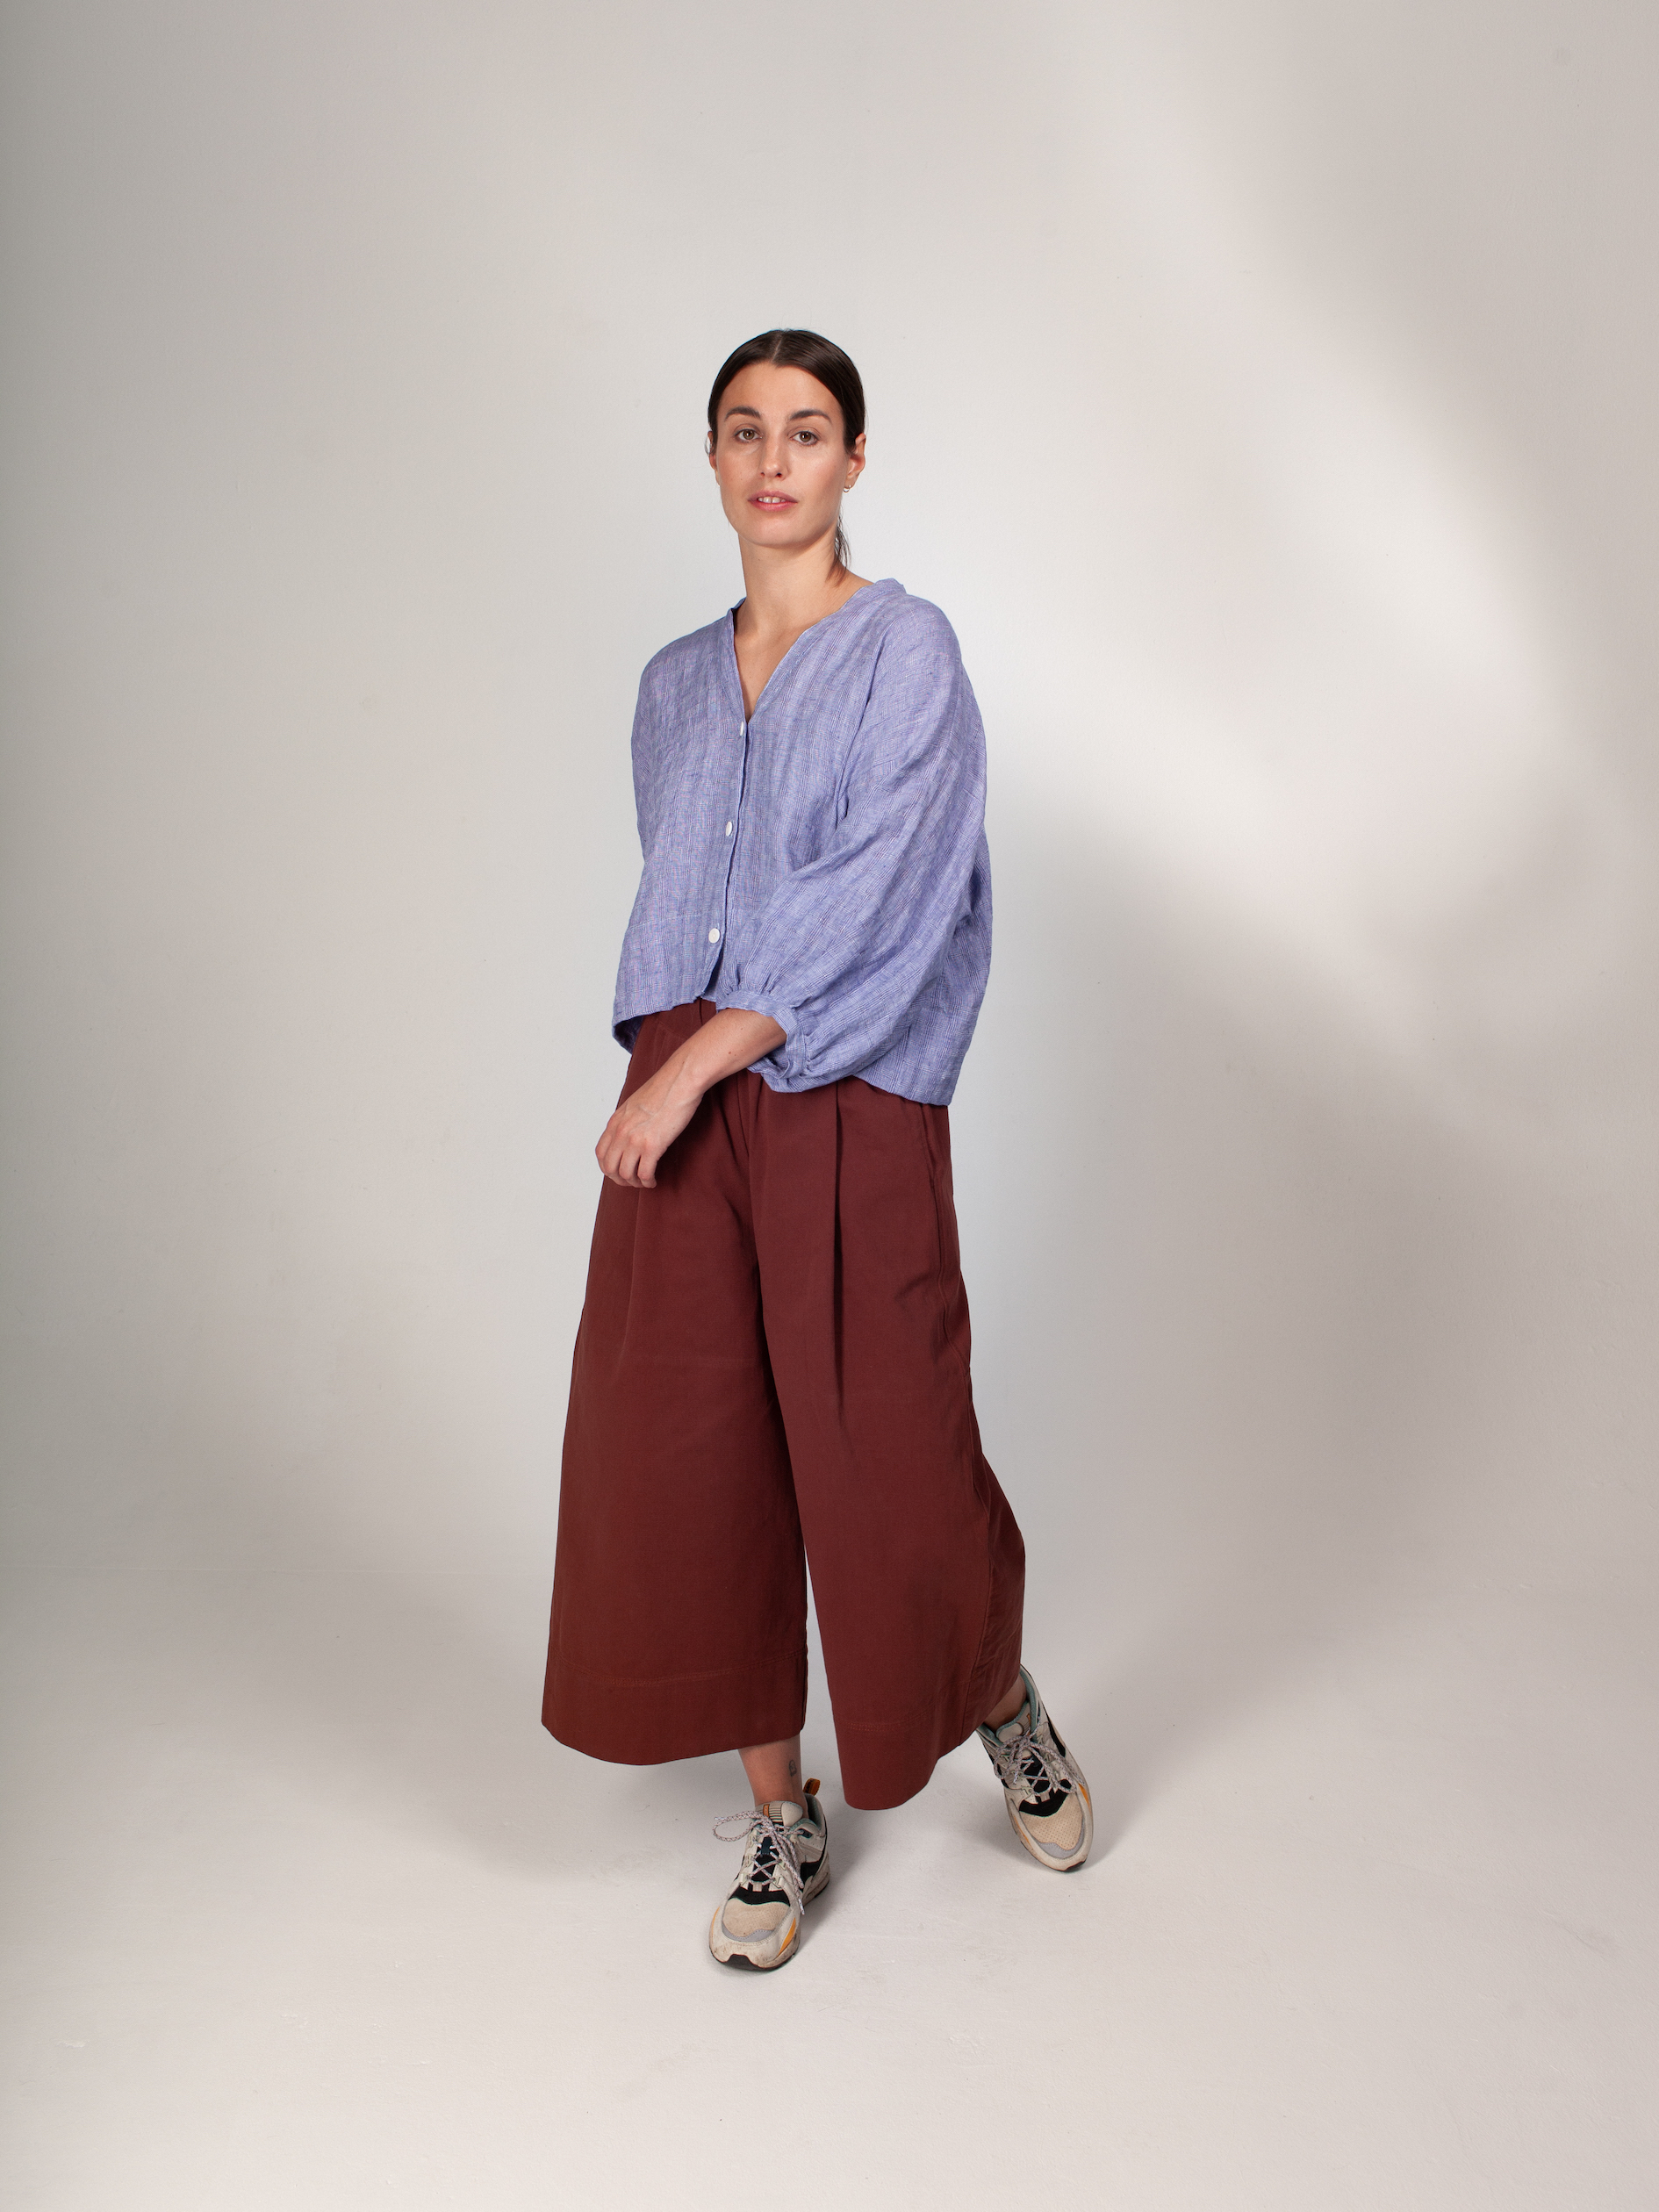 Woman wearing the ZW Block Pant sewing pattern from Birgitta Helmersson on The Fold Line. A wide legged, relaxed fitting trouser pattern made in medium-heavy weight woven cotton and linen or light-mid weight wool fabrics, featuring a waistband with inserted elastic, concealed in-seam pockets at the front and patch pockets at the back.